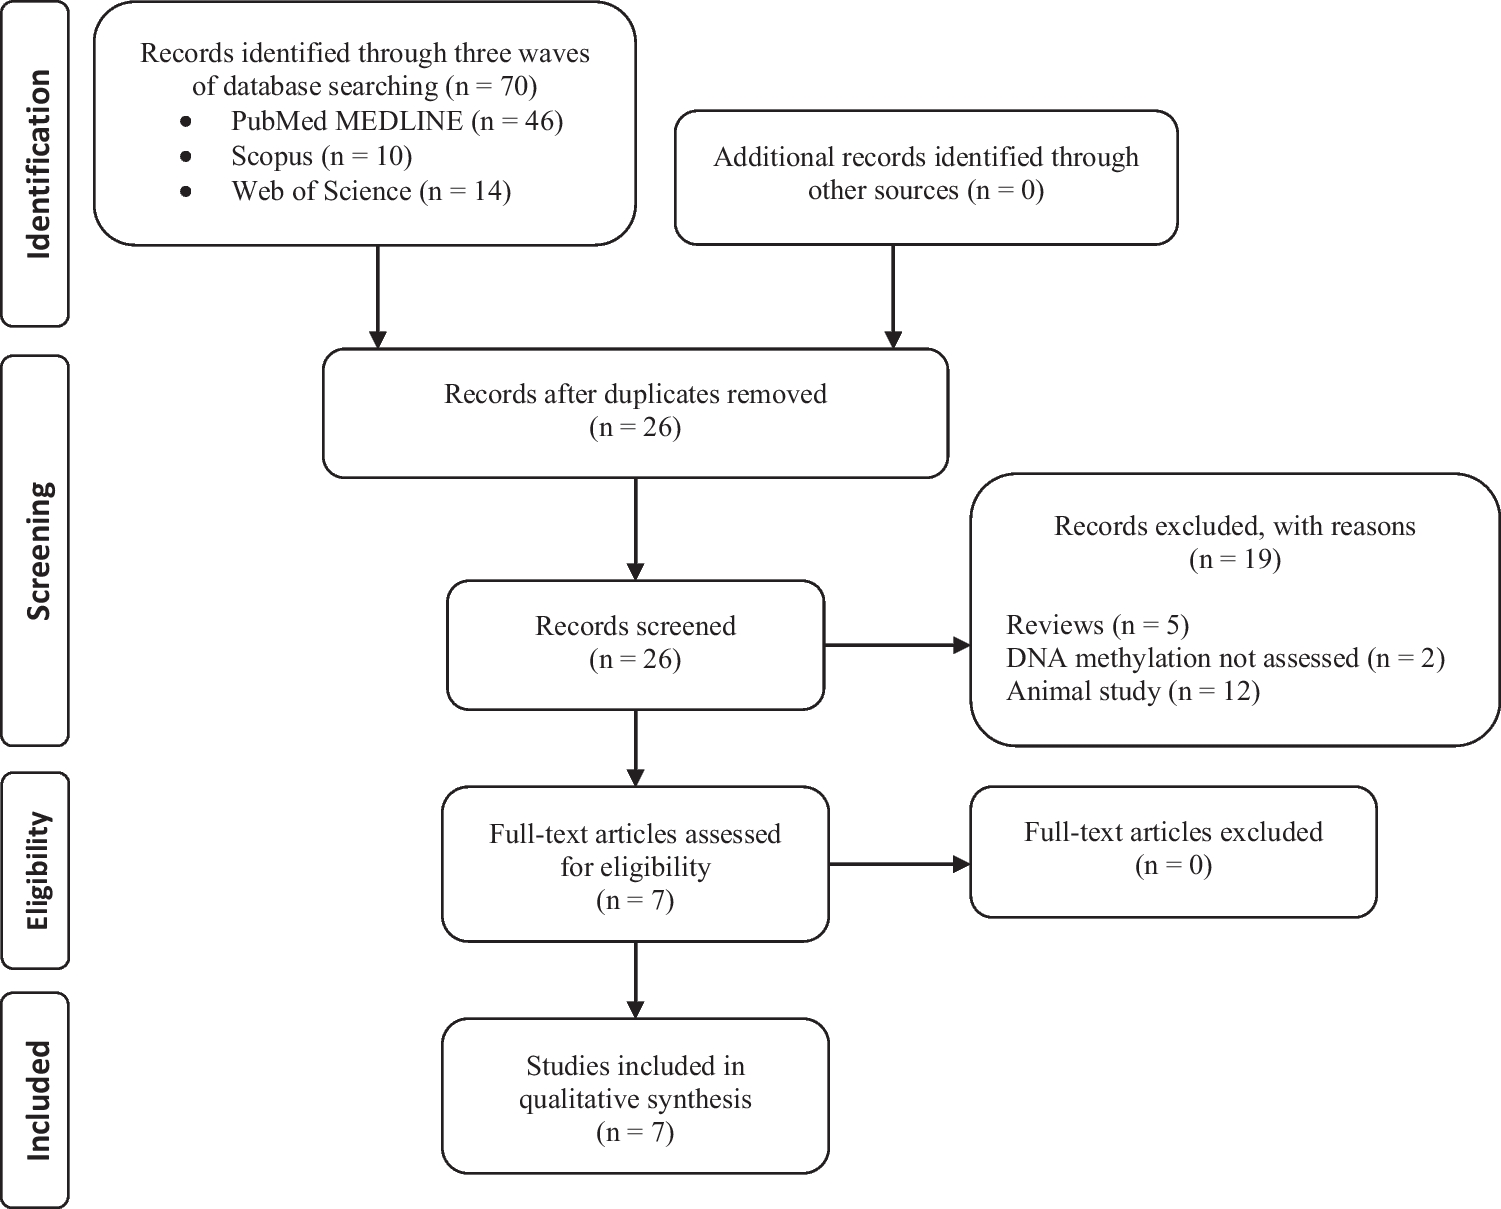 Differential DNA methylation associated with delayed cerebral ischemia after aneurysmal subarachnoid hemorrhage: a systematic review